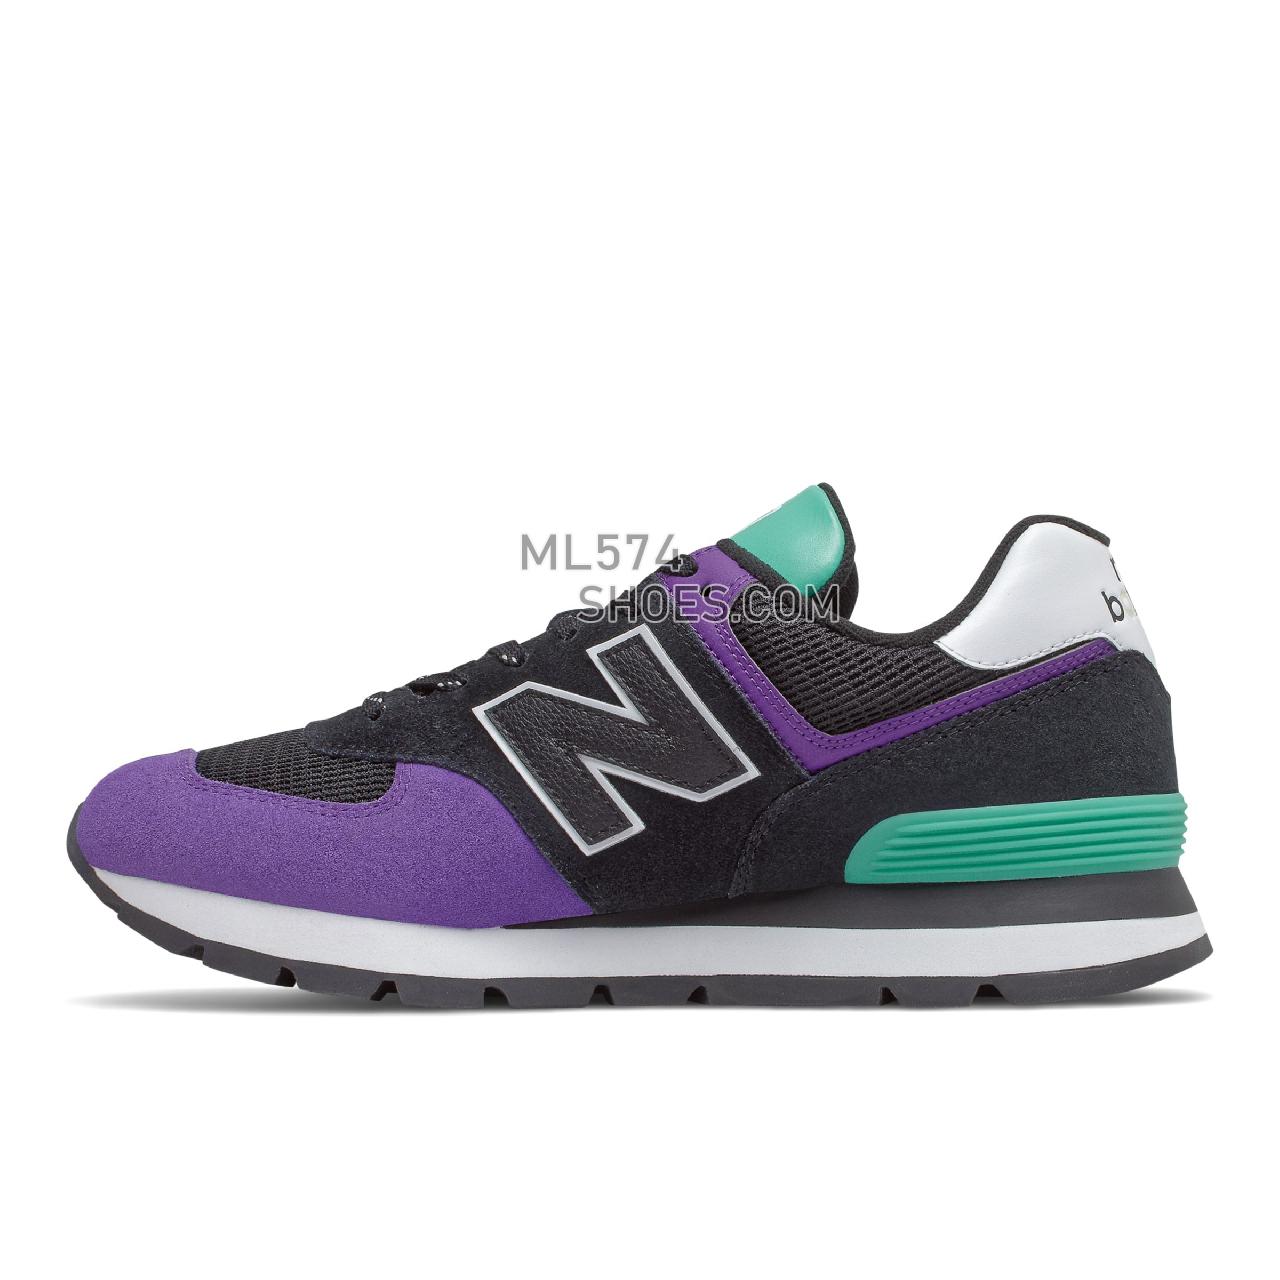 New Balance 574 Rugged - Men's All Terrain - Black with Prism Purple - ML574DNT